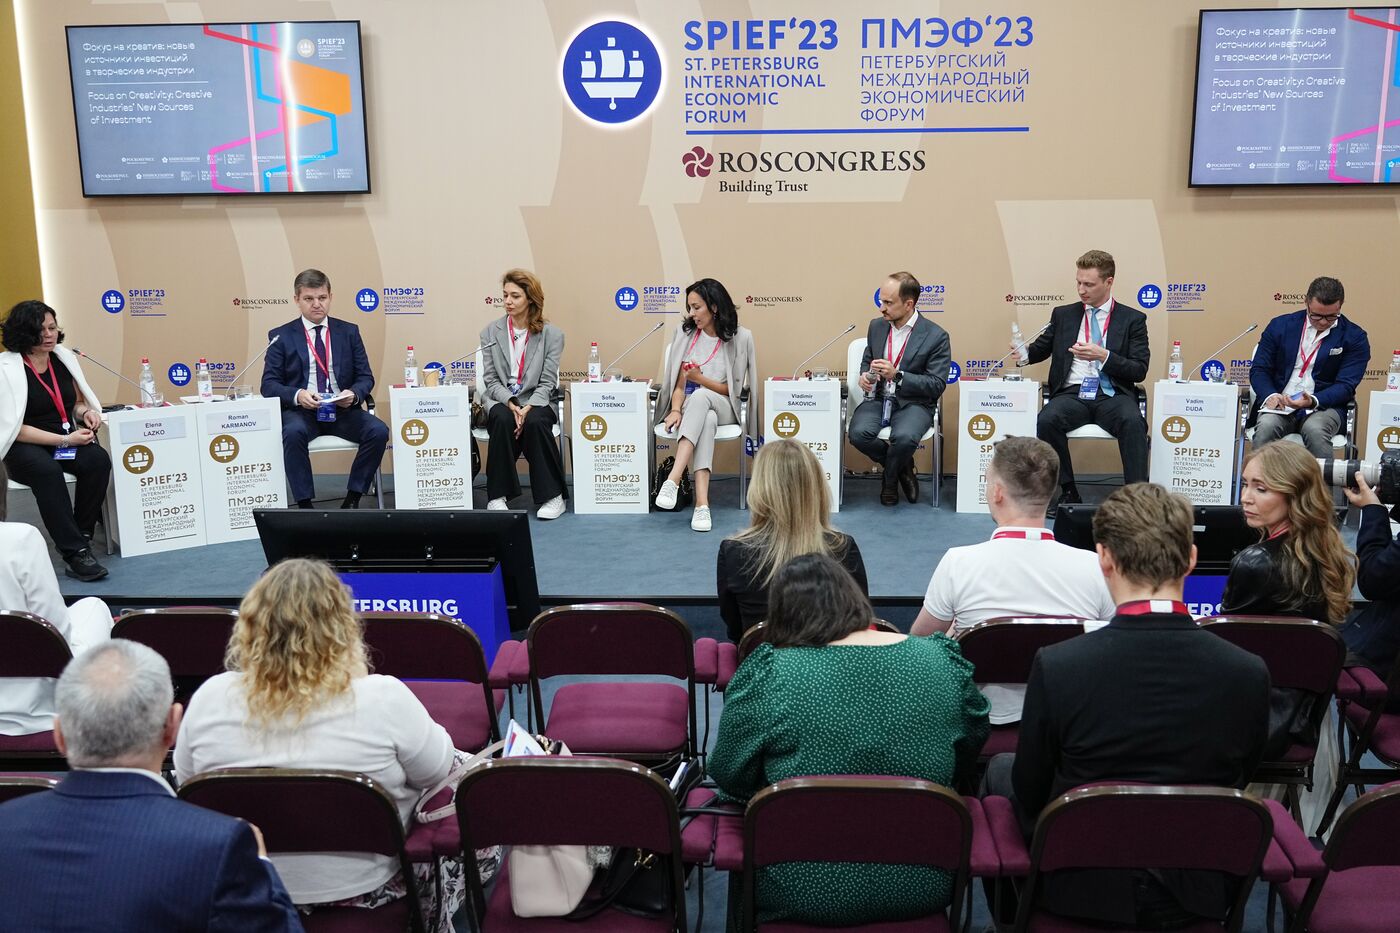 SPIEF-2023. Focus on Creativity: Creative Industries' New Sources of Investment